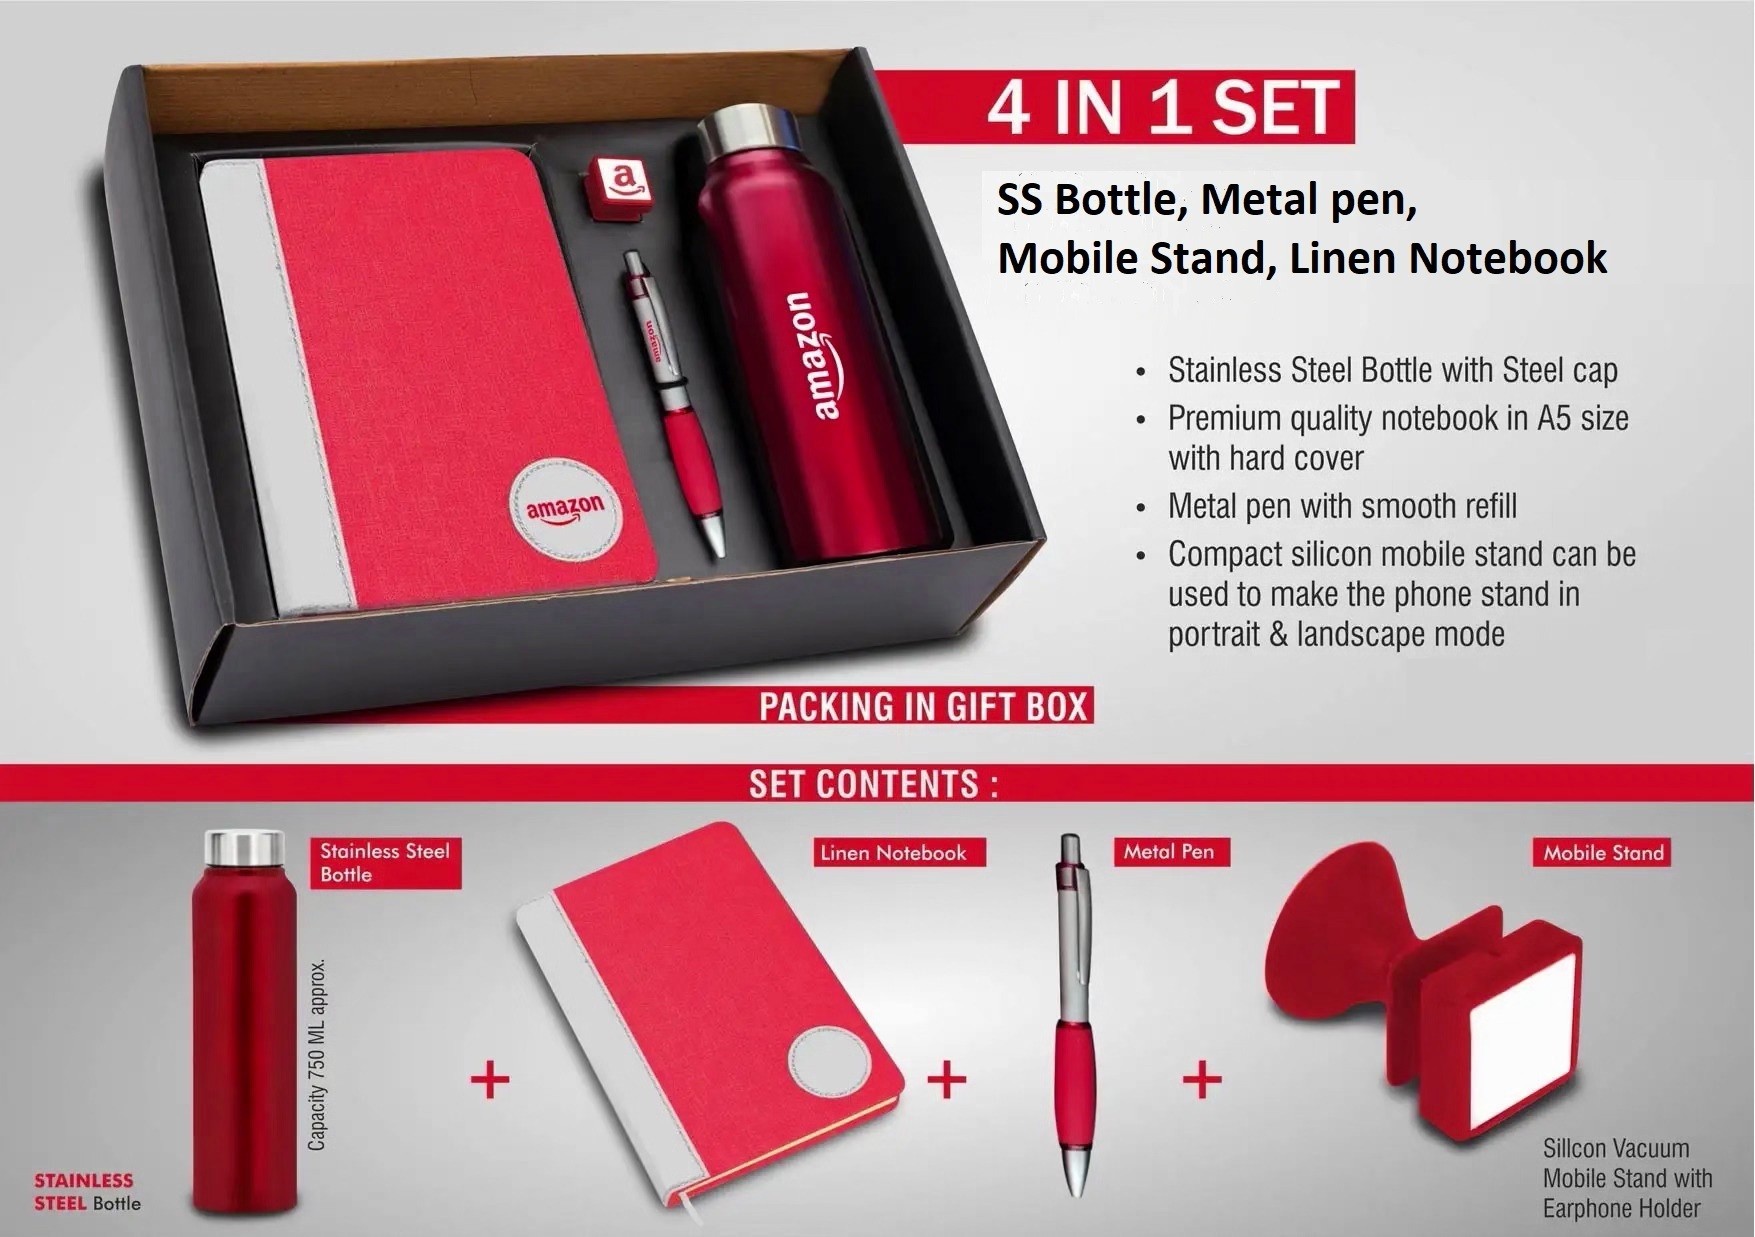 4 In 1 Set:  Steel Bottle, Metal Pen, Silicon Mobile Stand, Linen Binary Notebook